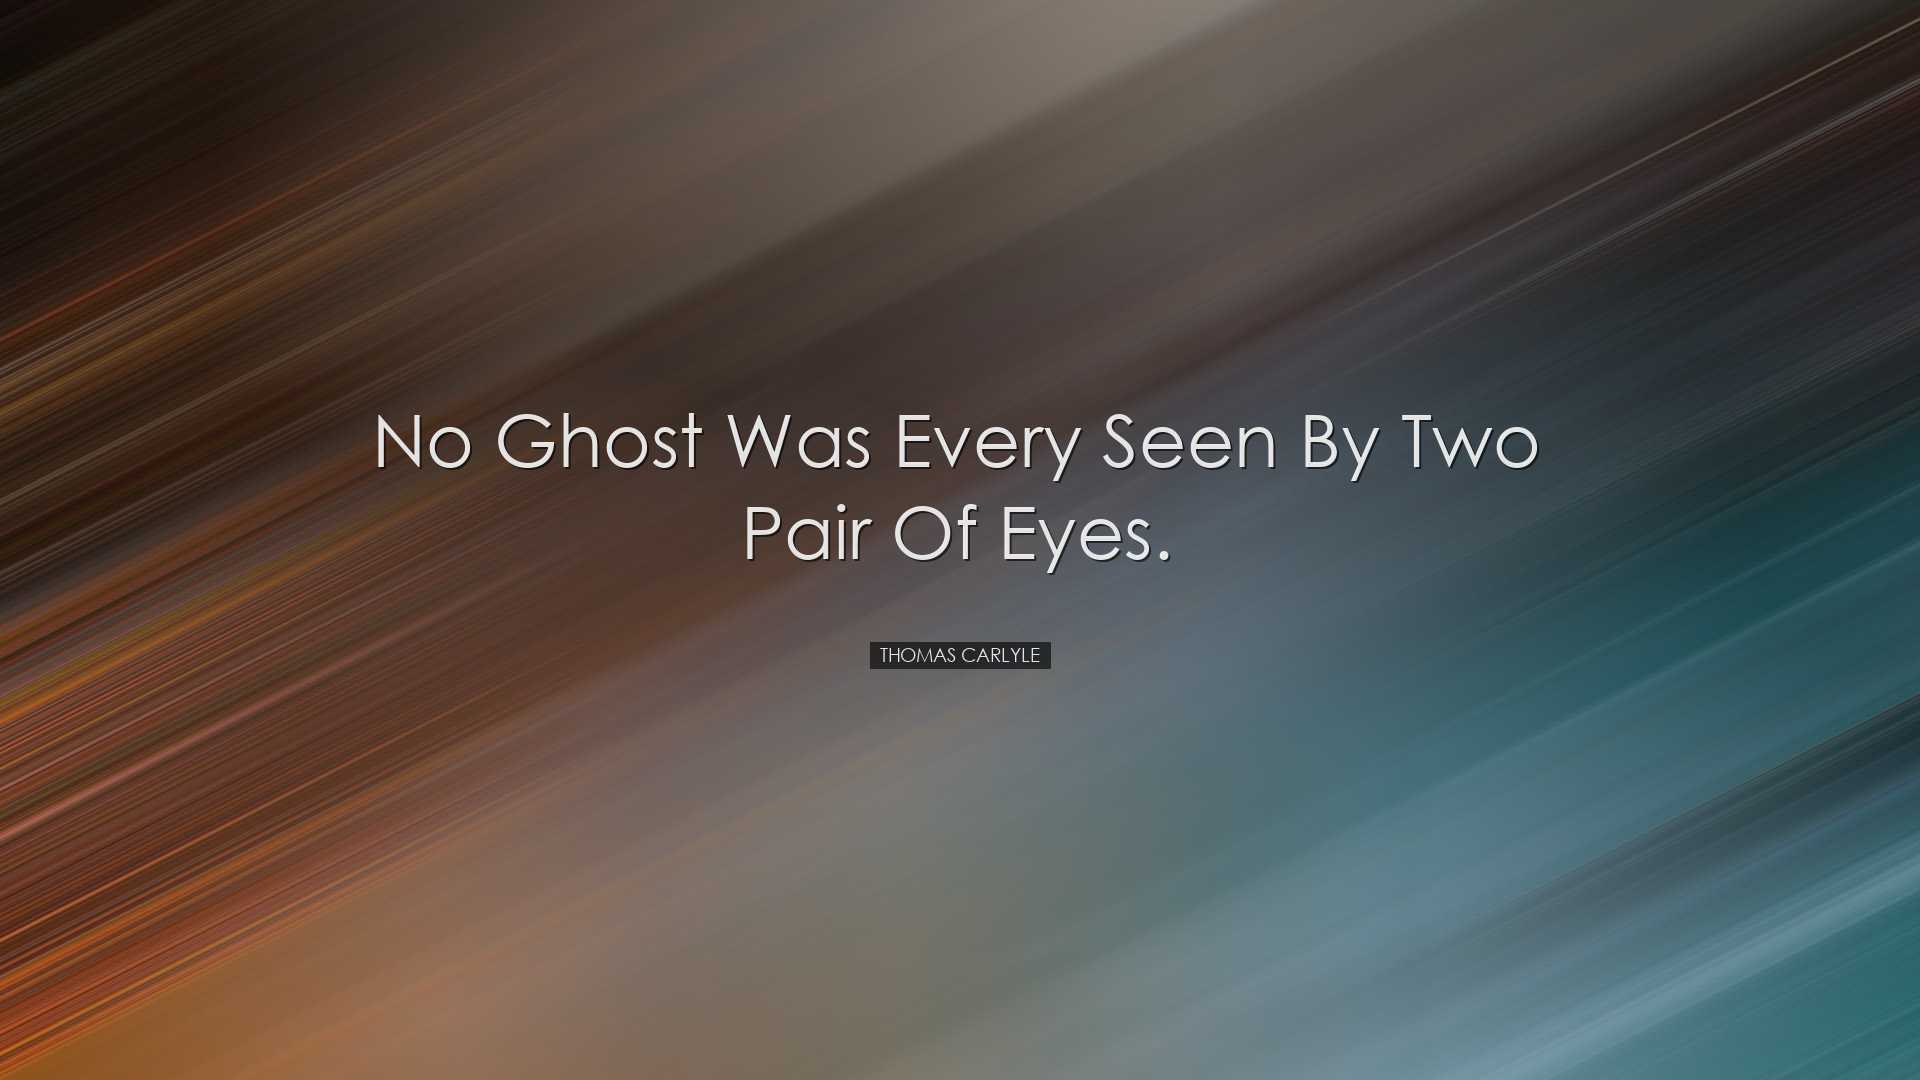 No ghost was every seen by two pair of eyes. - Thomas Carlyle